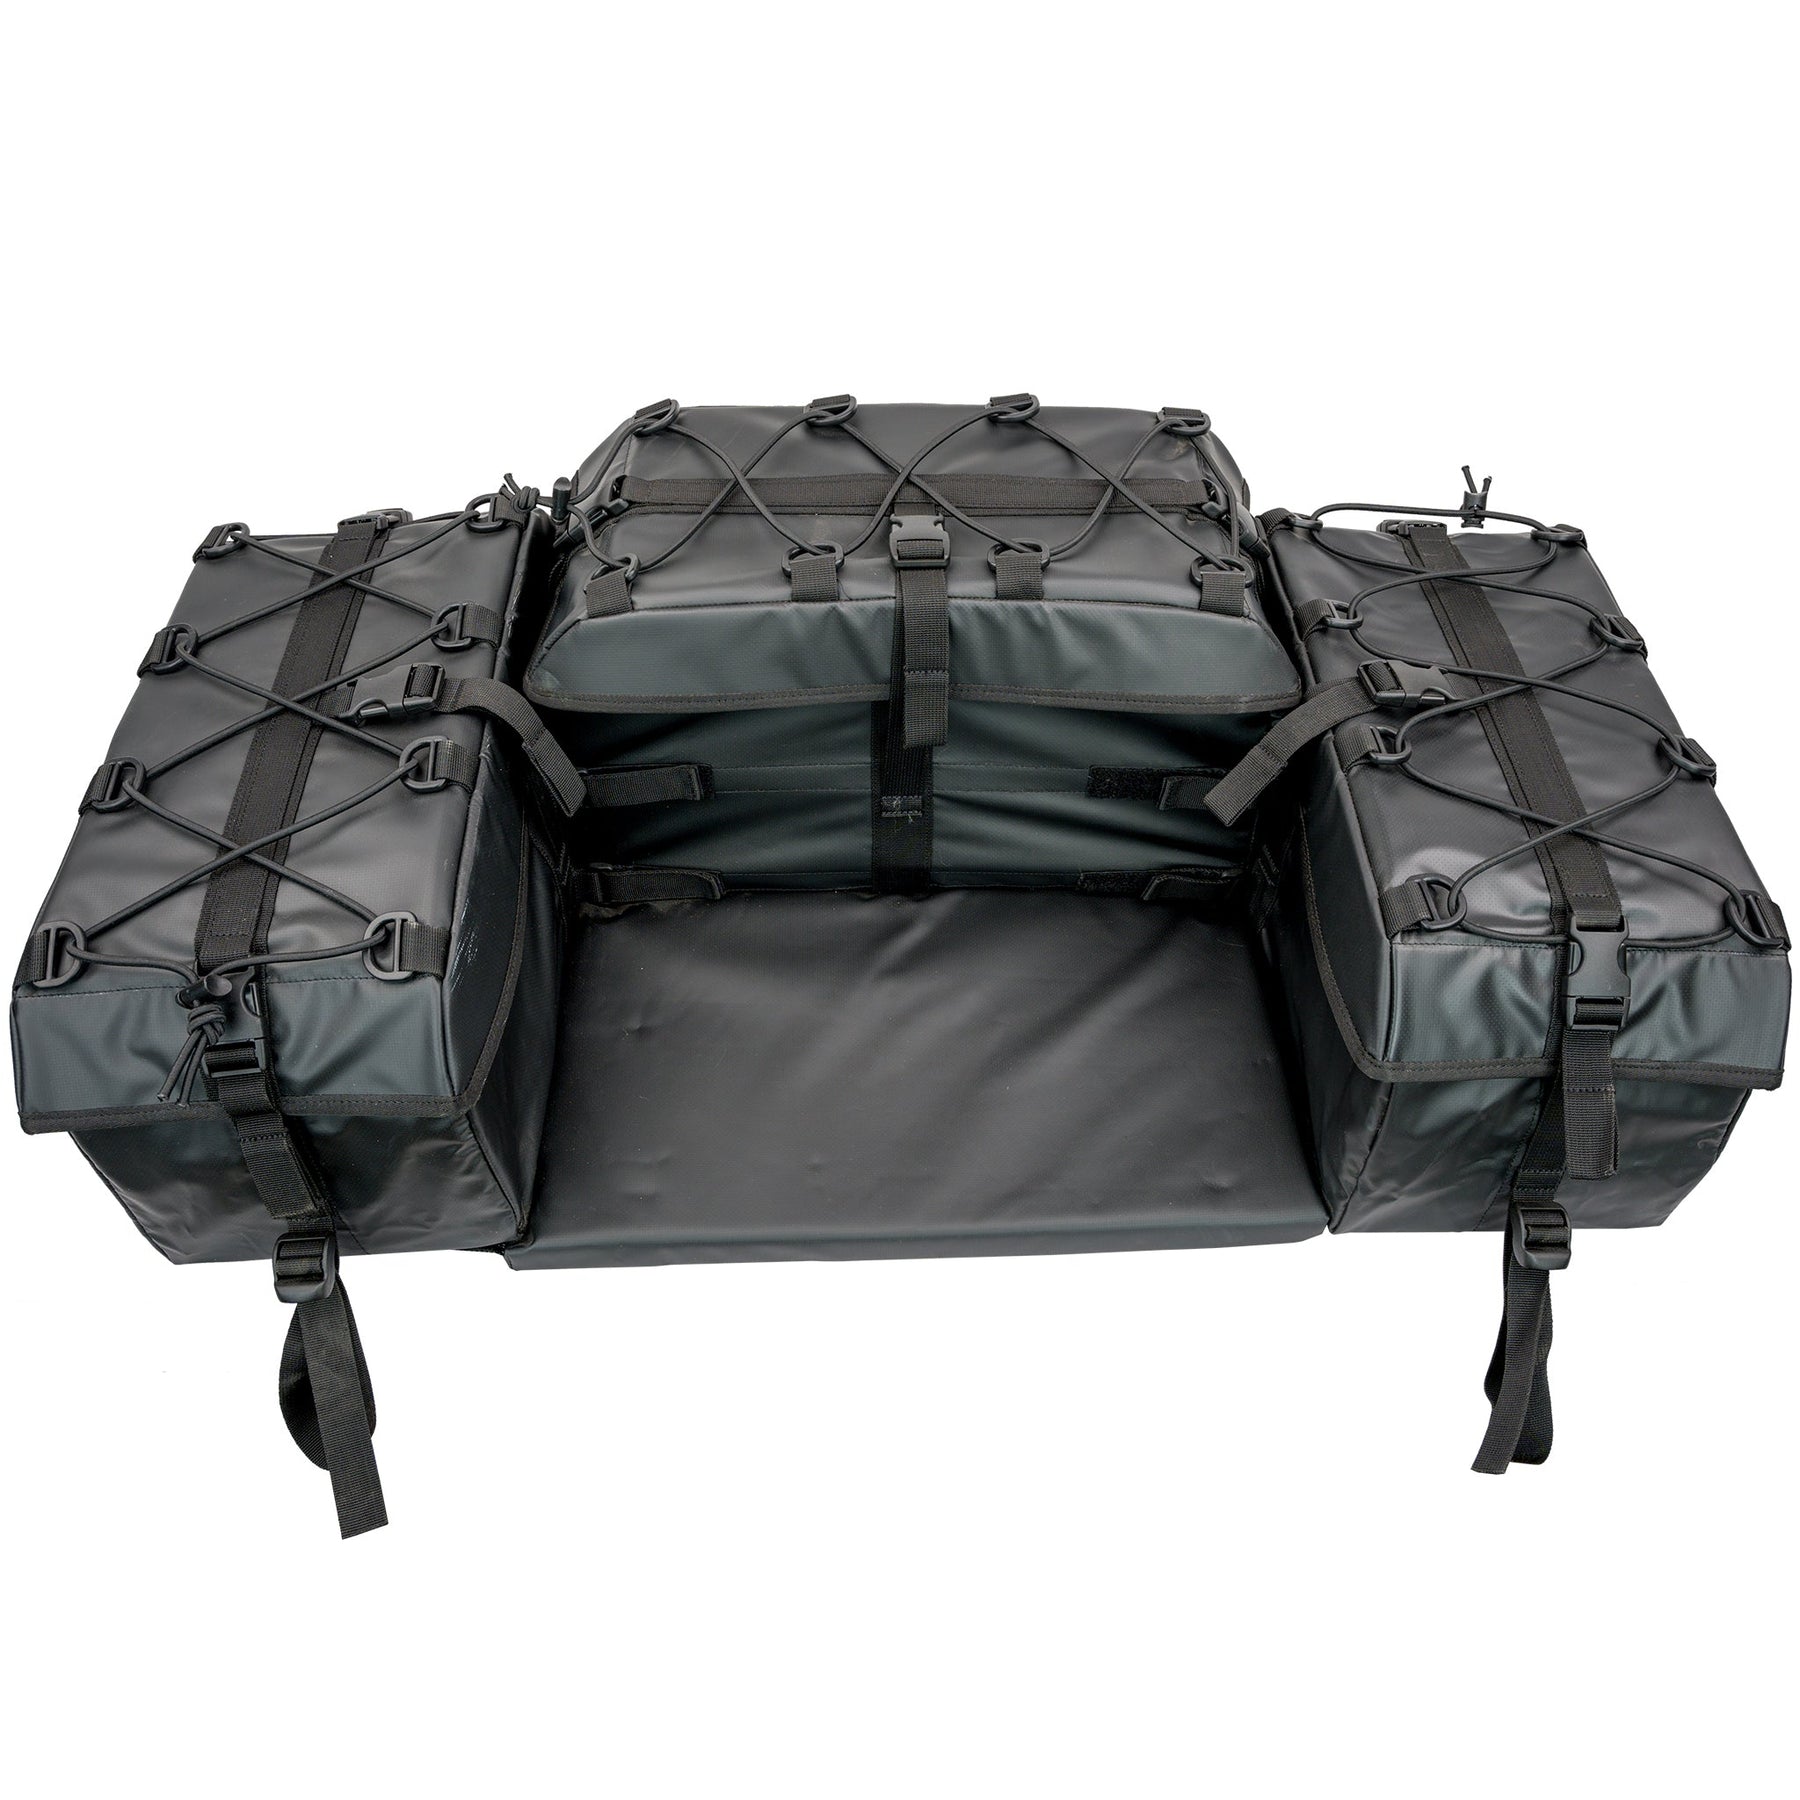 ARCH SERIES™ PADDED BOTTOM BAG - BLK or CAMO